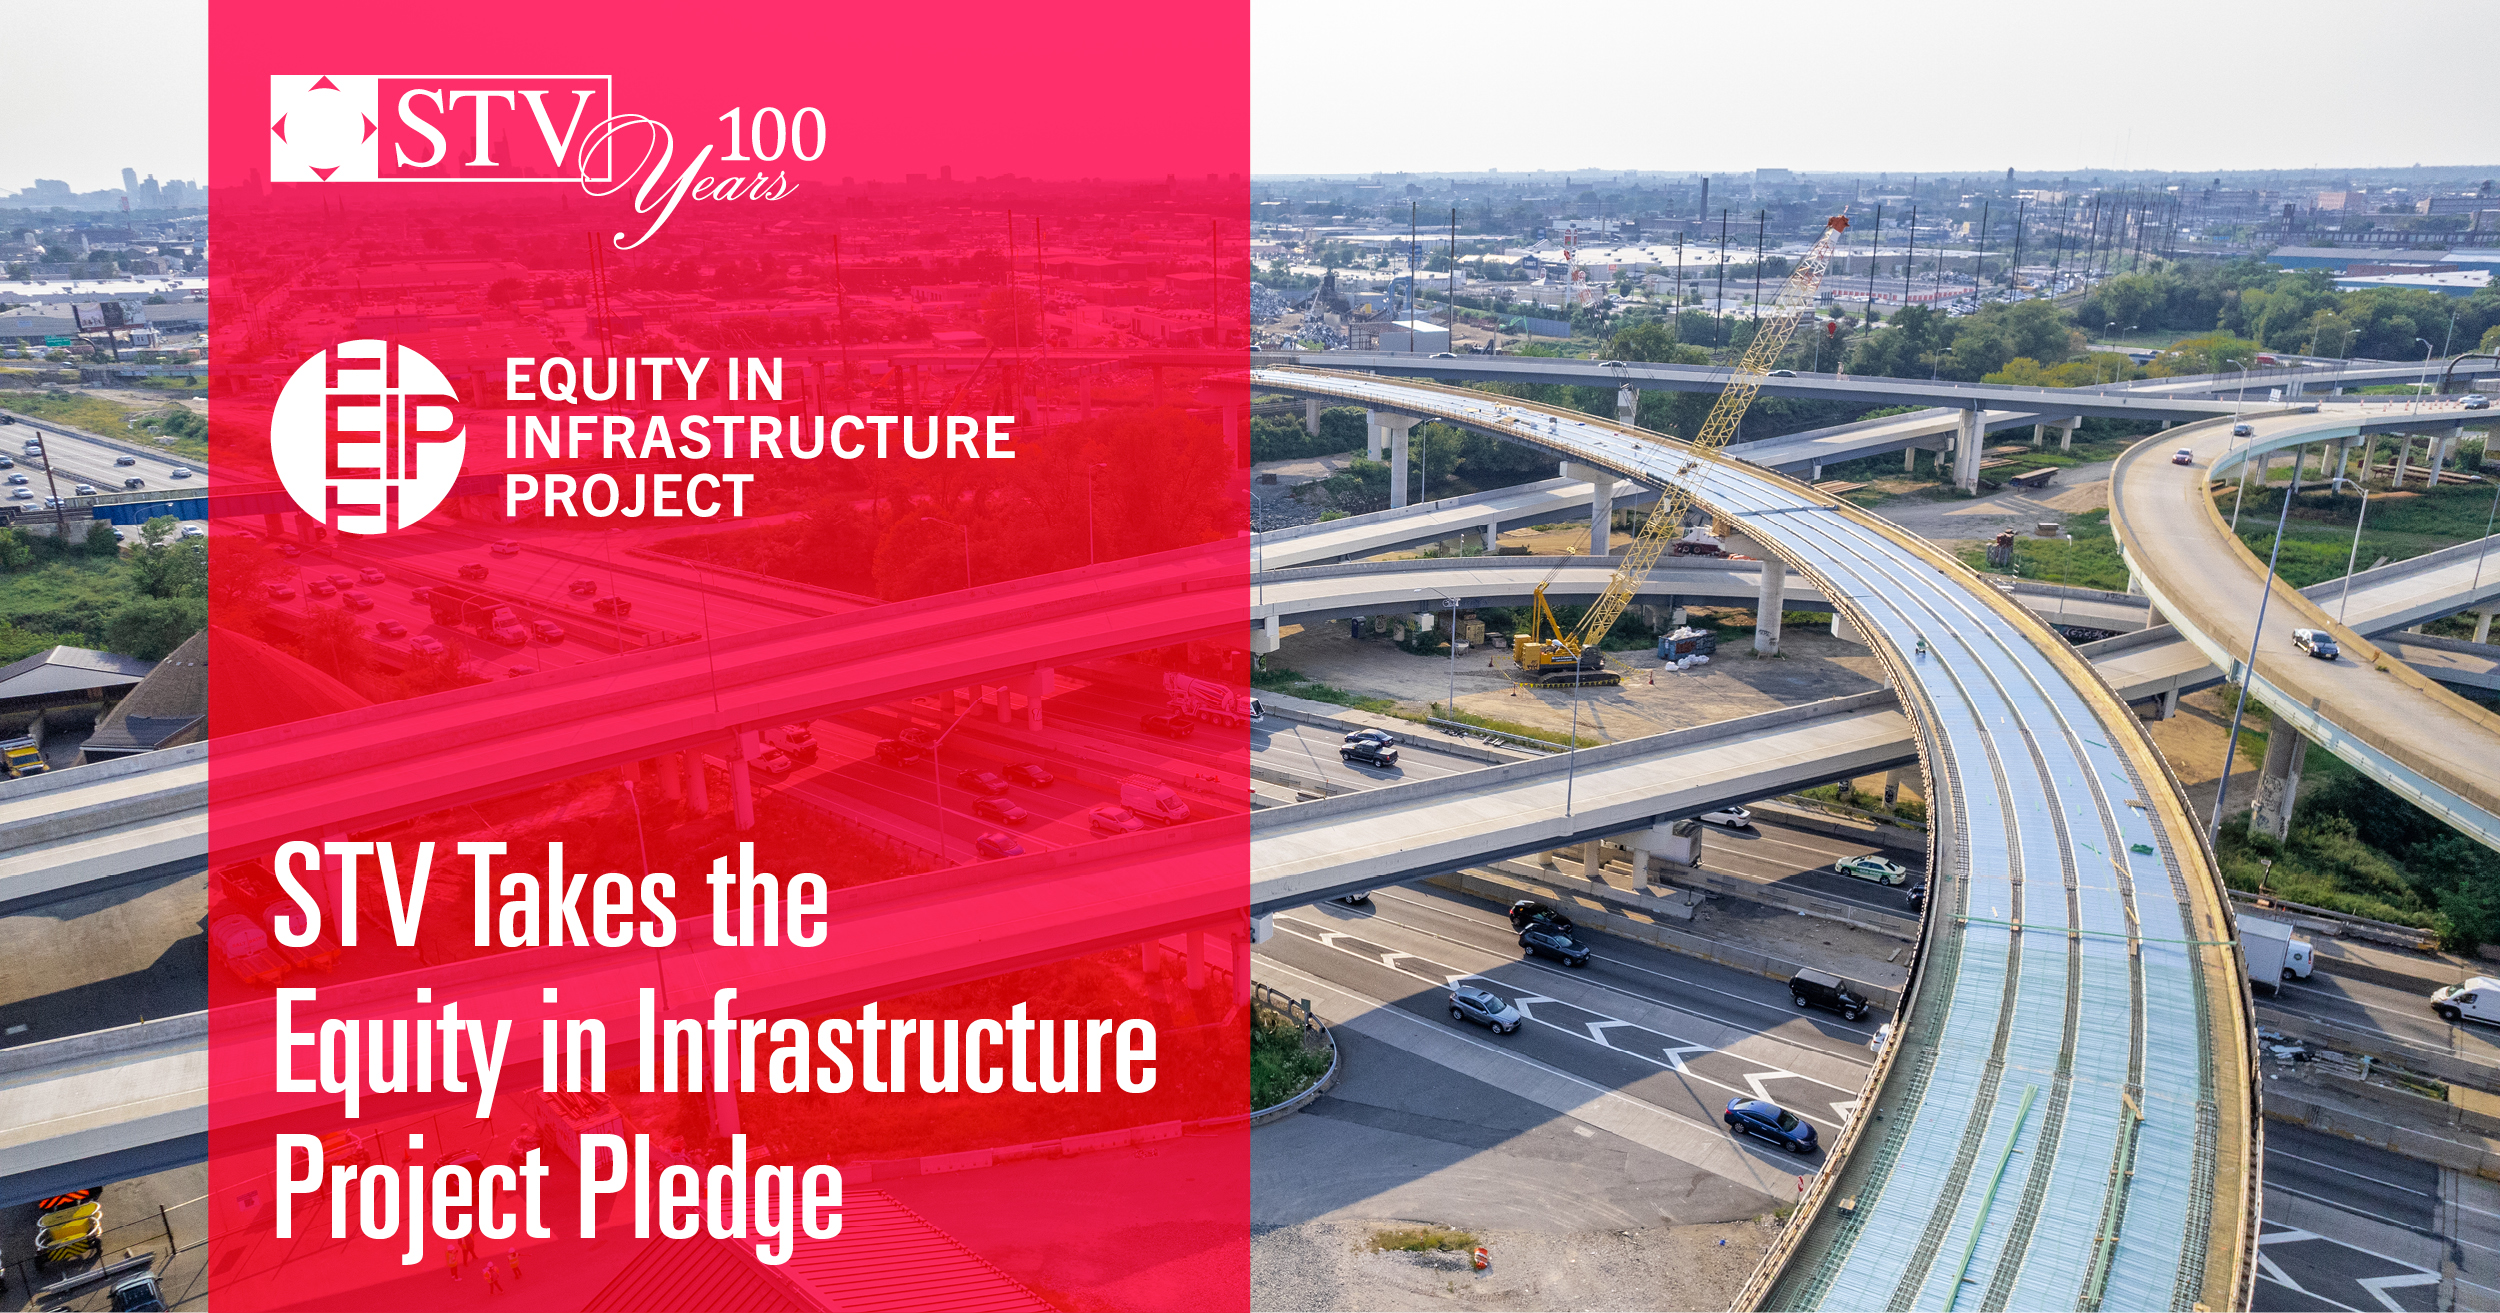 STV signs the Equity in Infrastructure Pledge